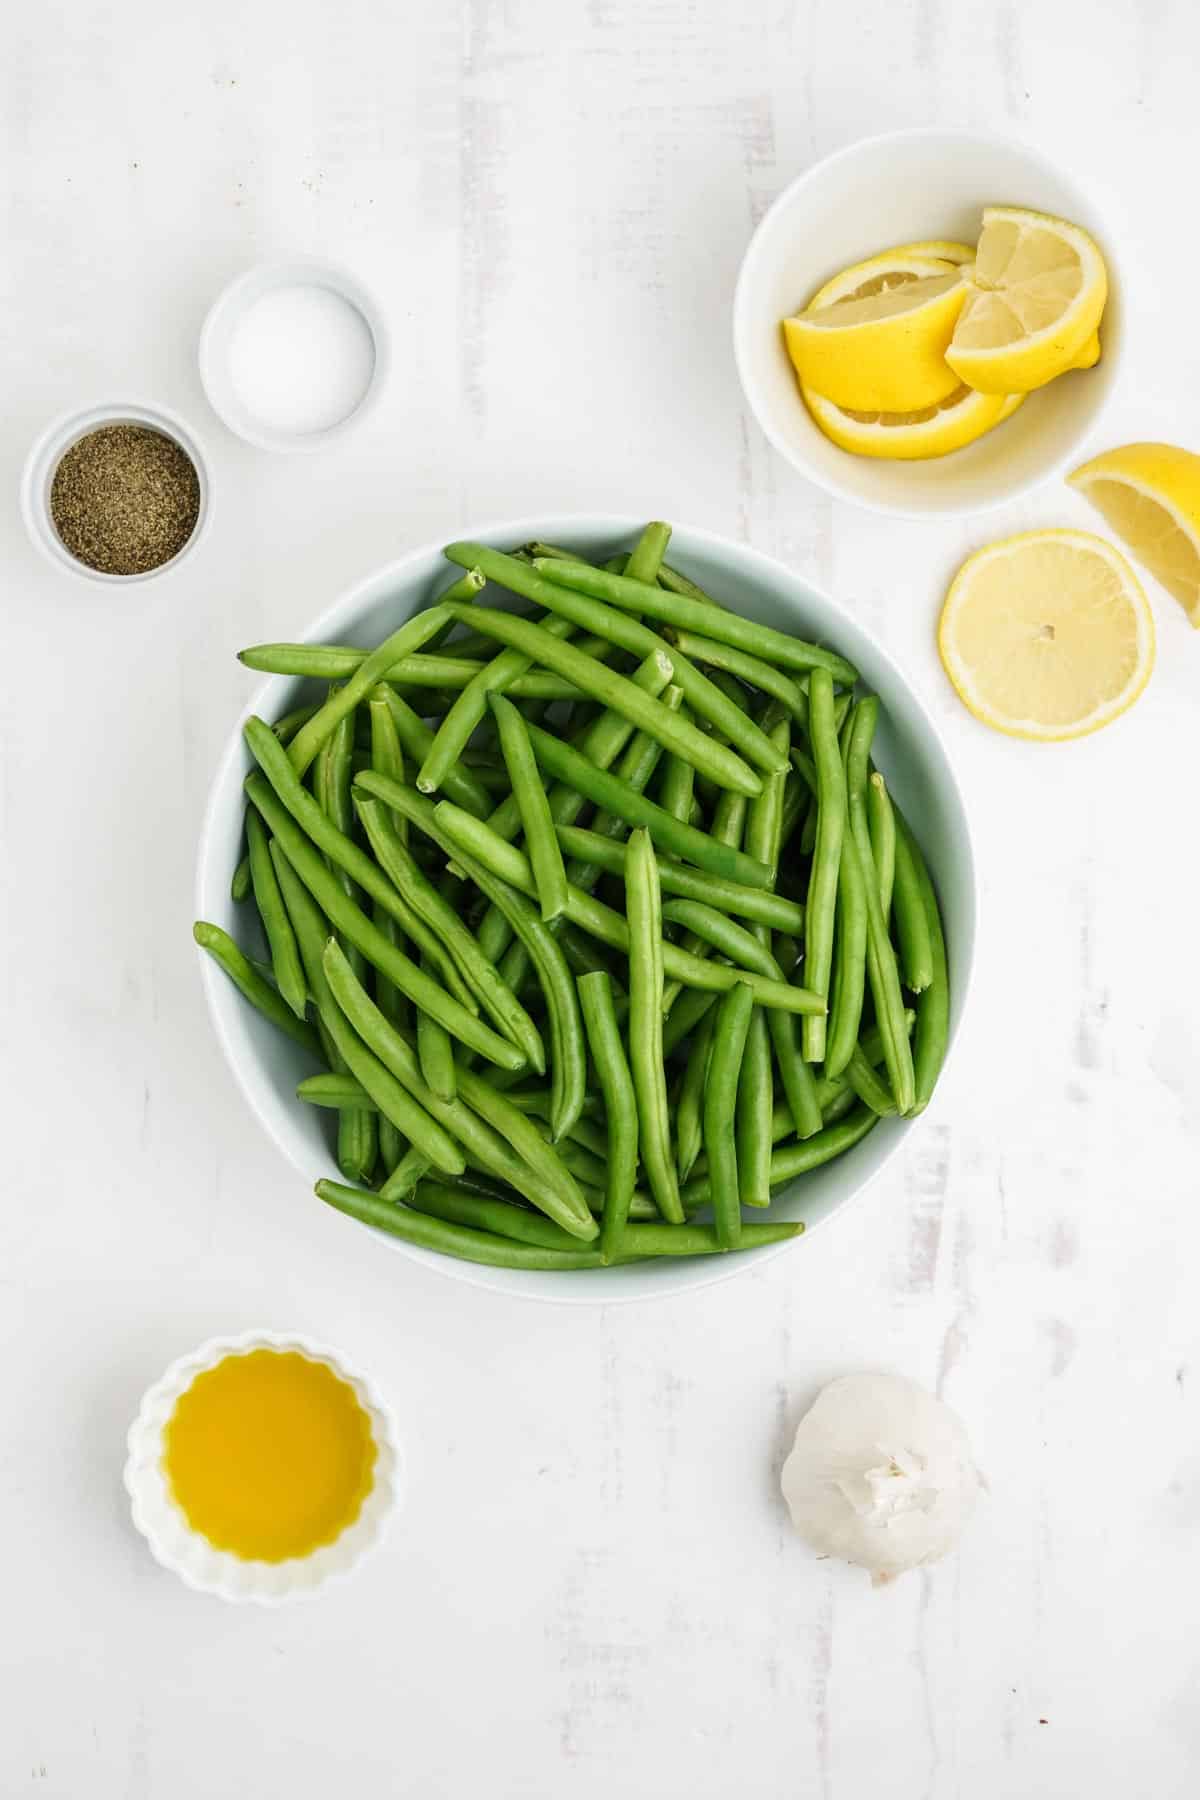 Ingredients to make oven green beans on the table.